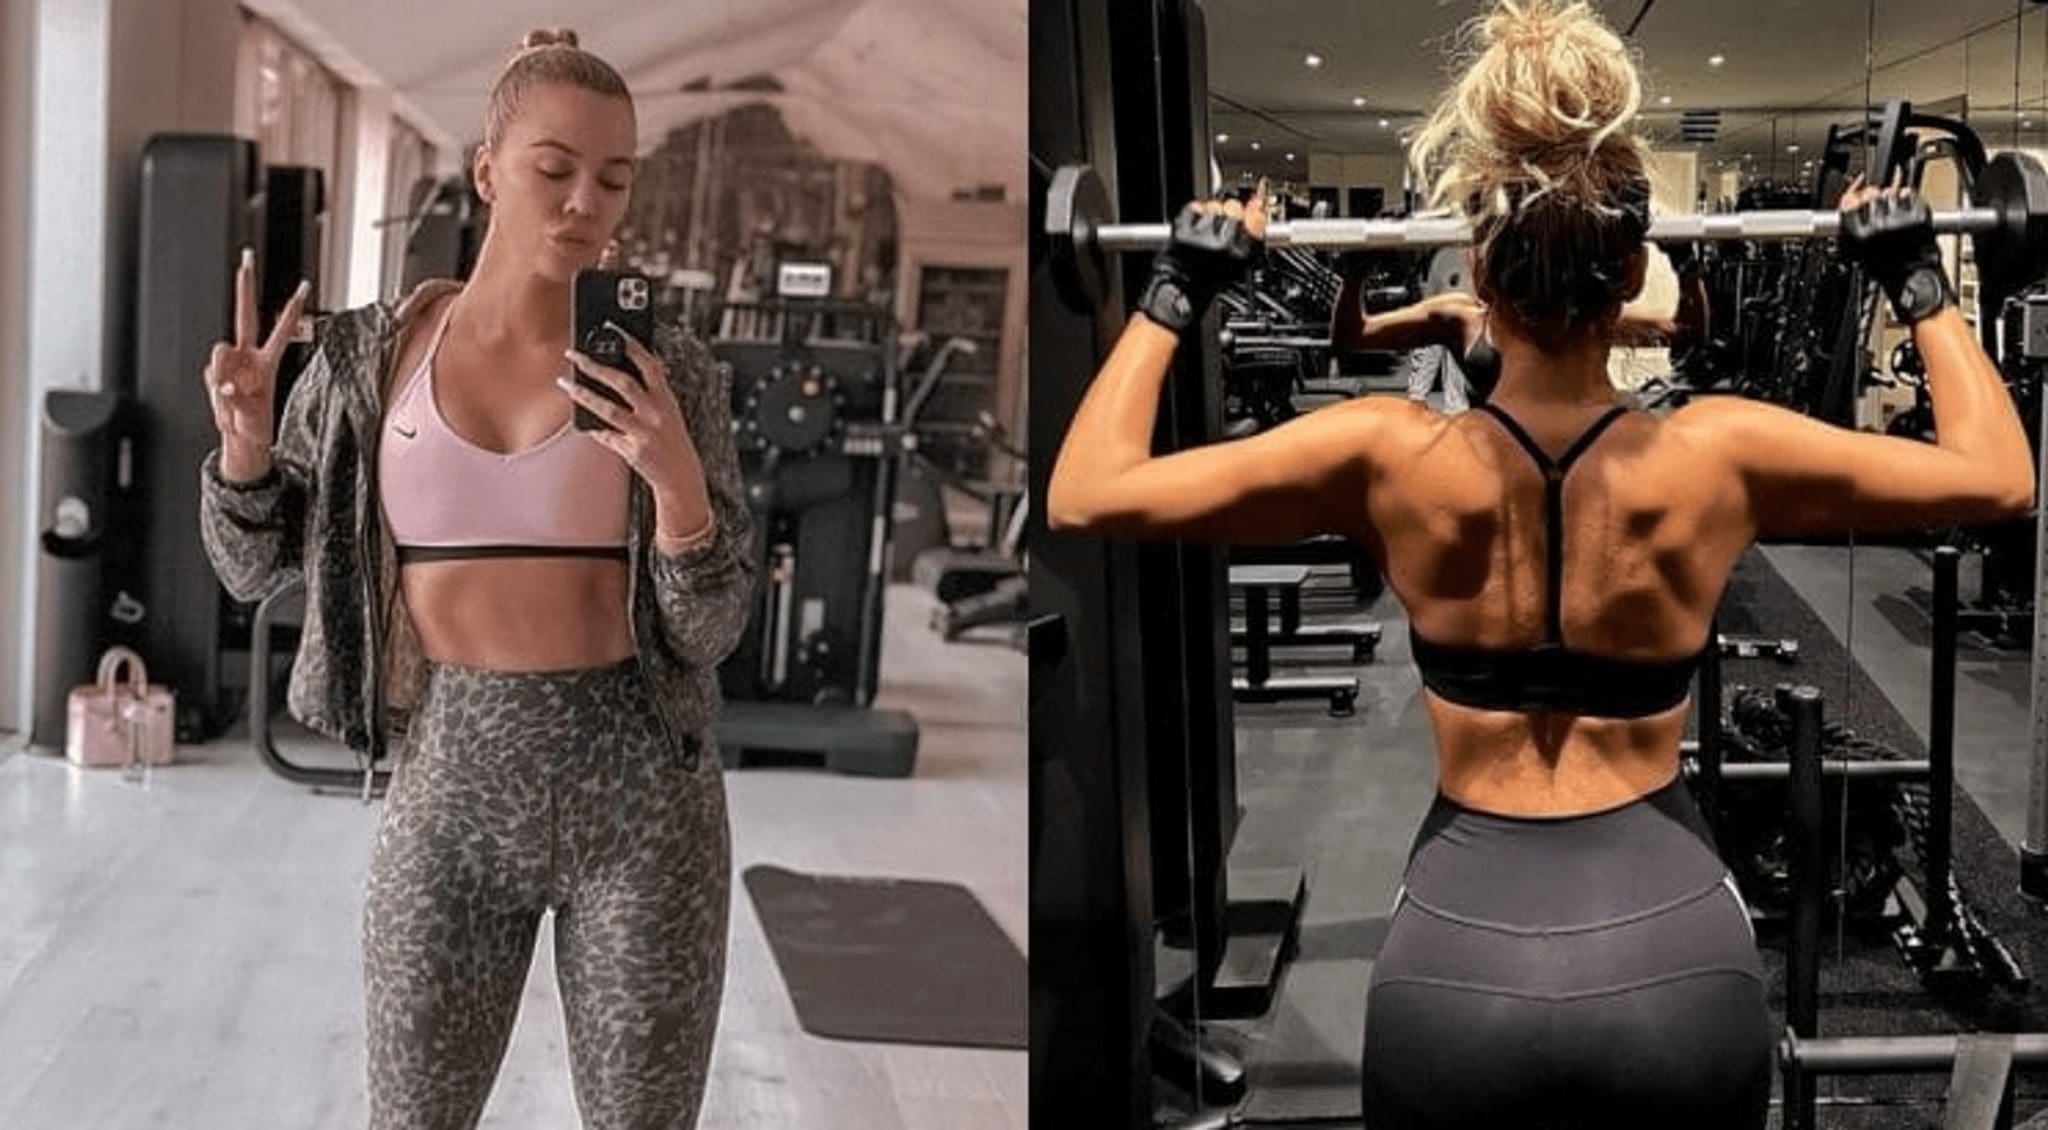 The personal trainer of Khloe Kardashian, who has lost a lot of weight, spoke about her daily workouts